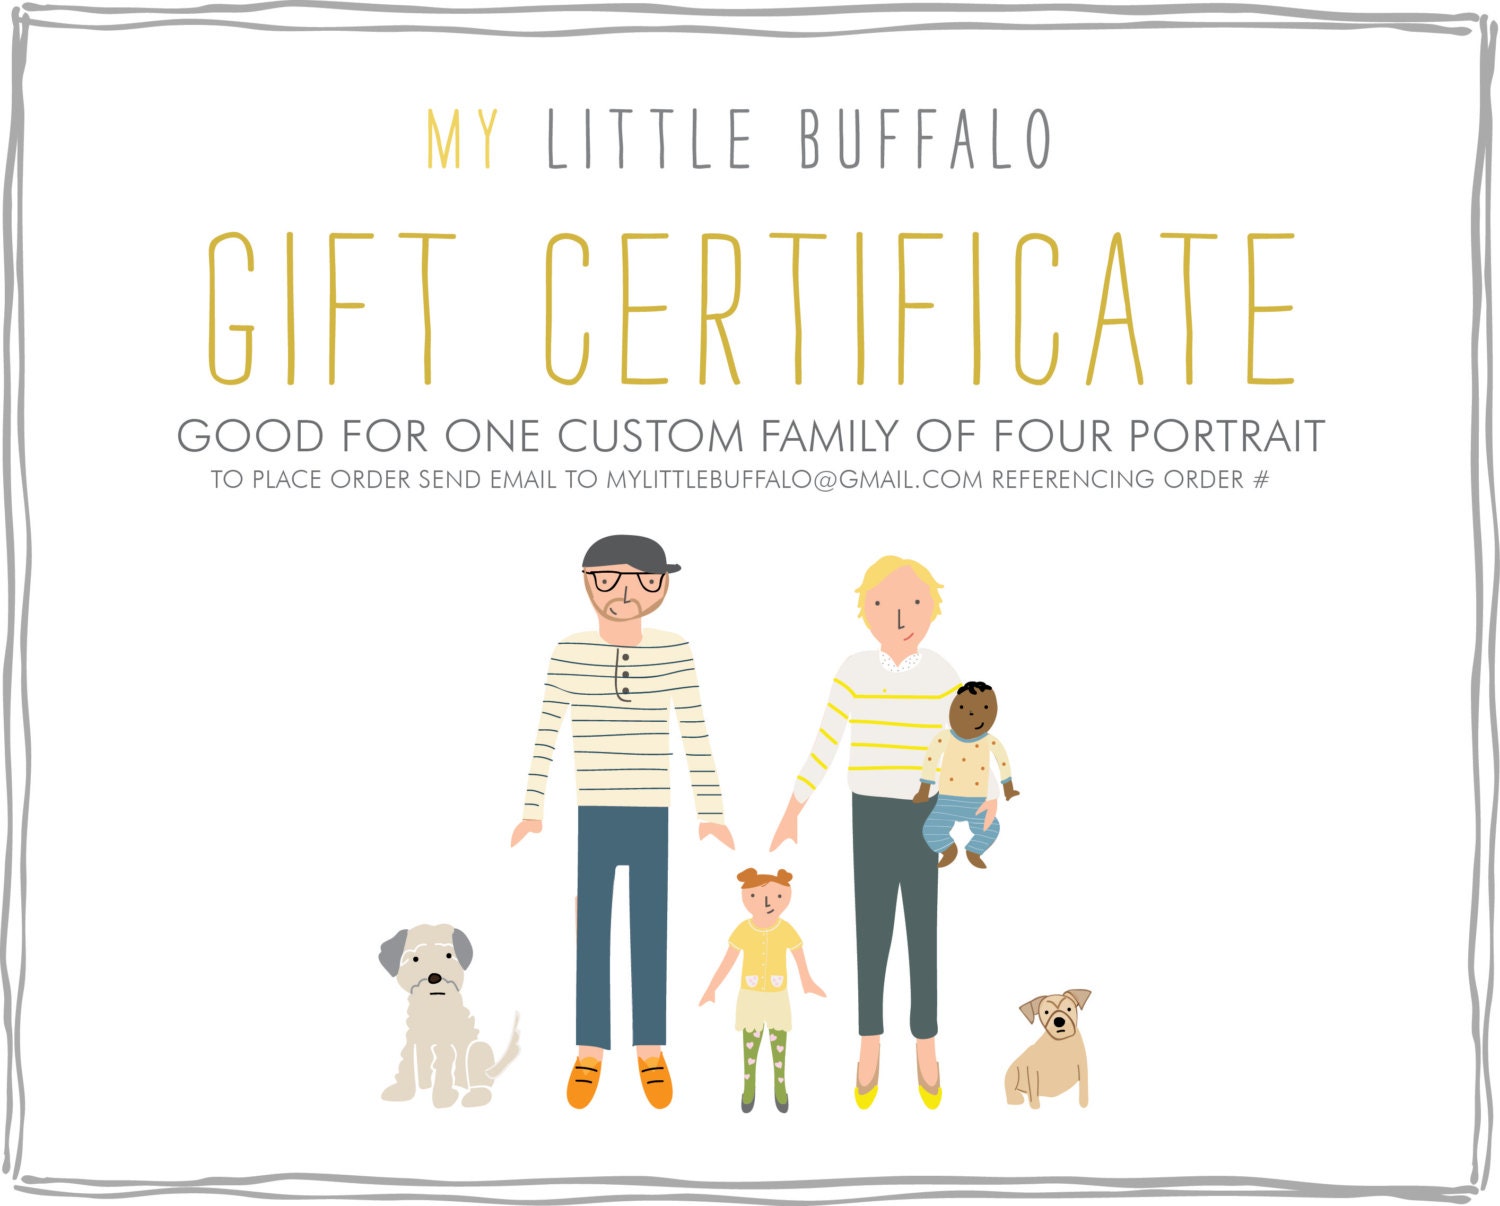 GIFT CERTIFICATE for a Custom Family Portrait by mylittlebuffalo